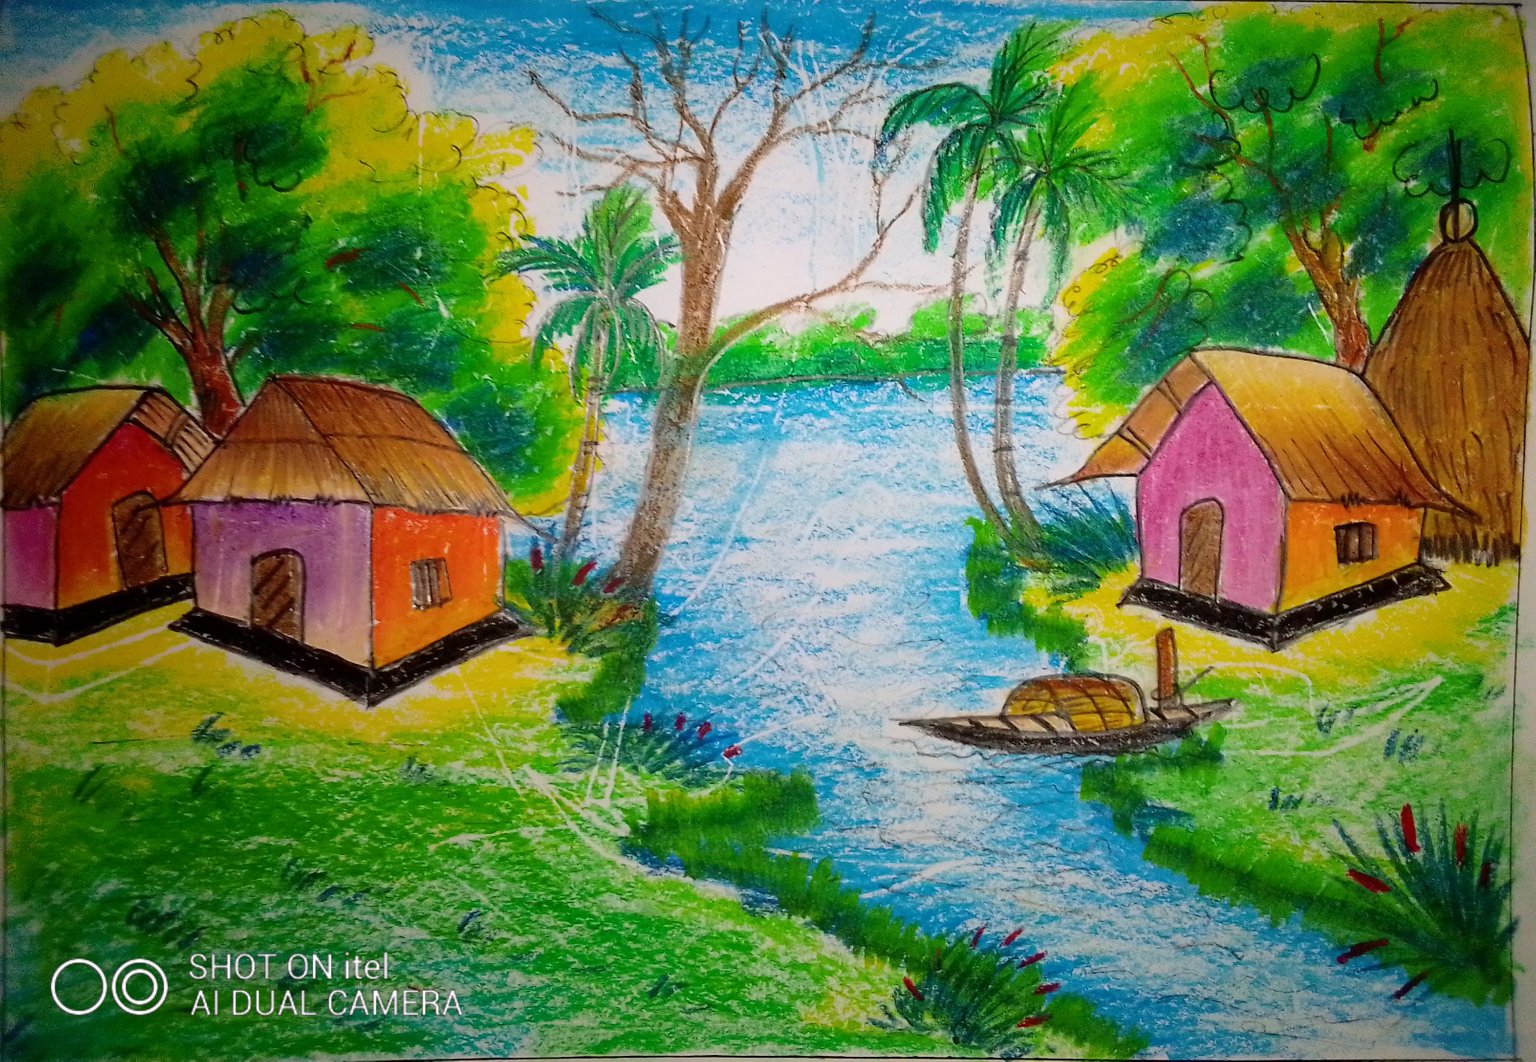 My Village. My country. Drawings. Pictures. Drawings ideas for kids. Easy  and simple.